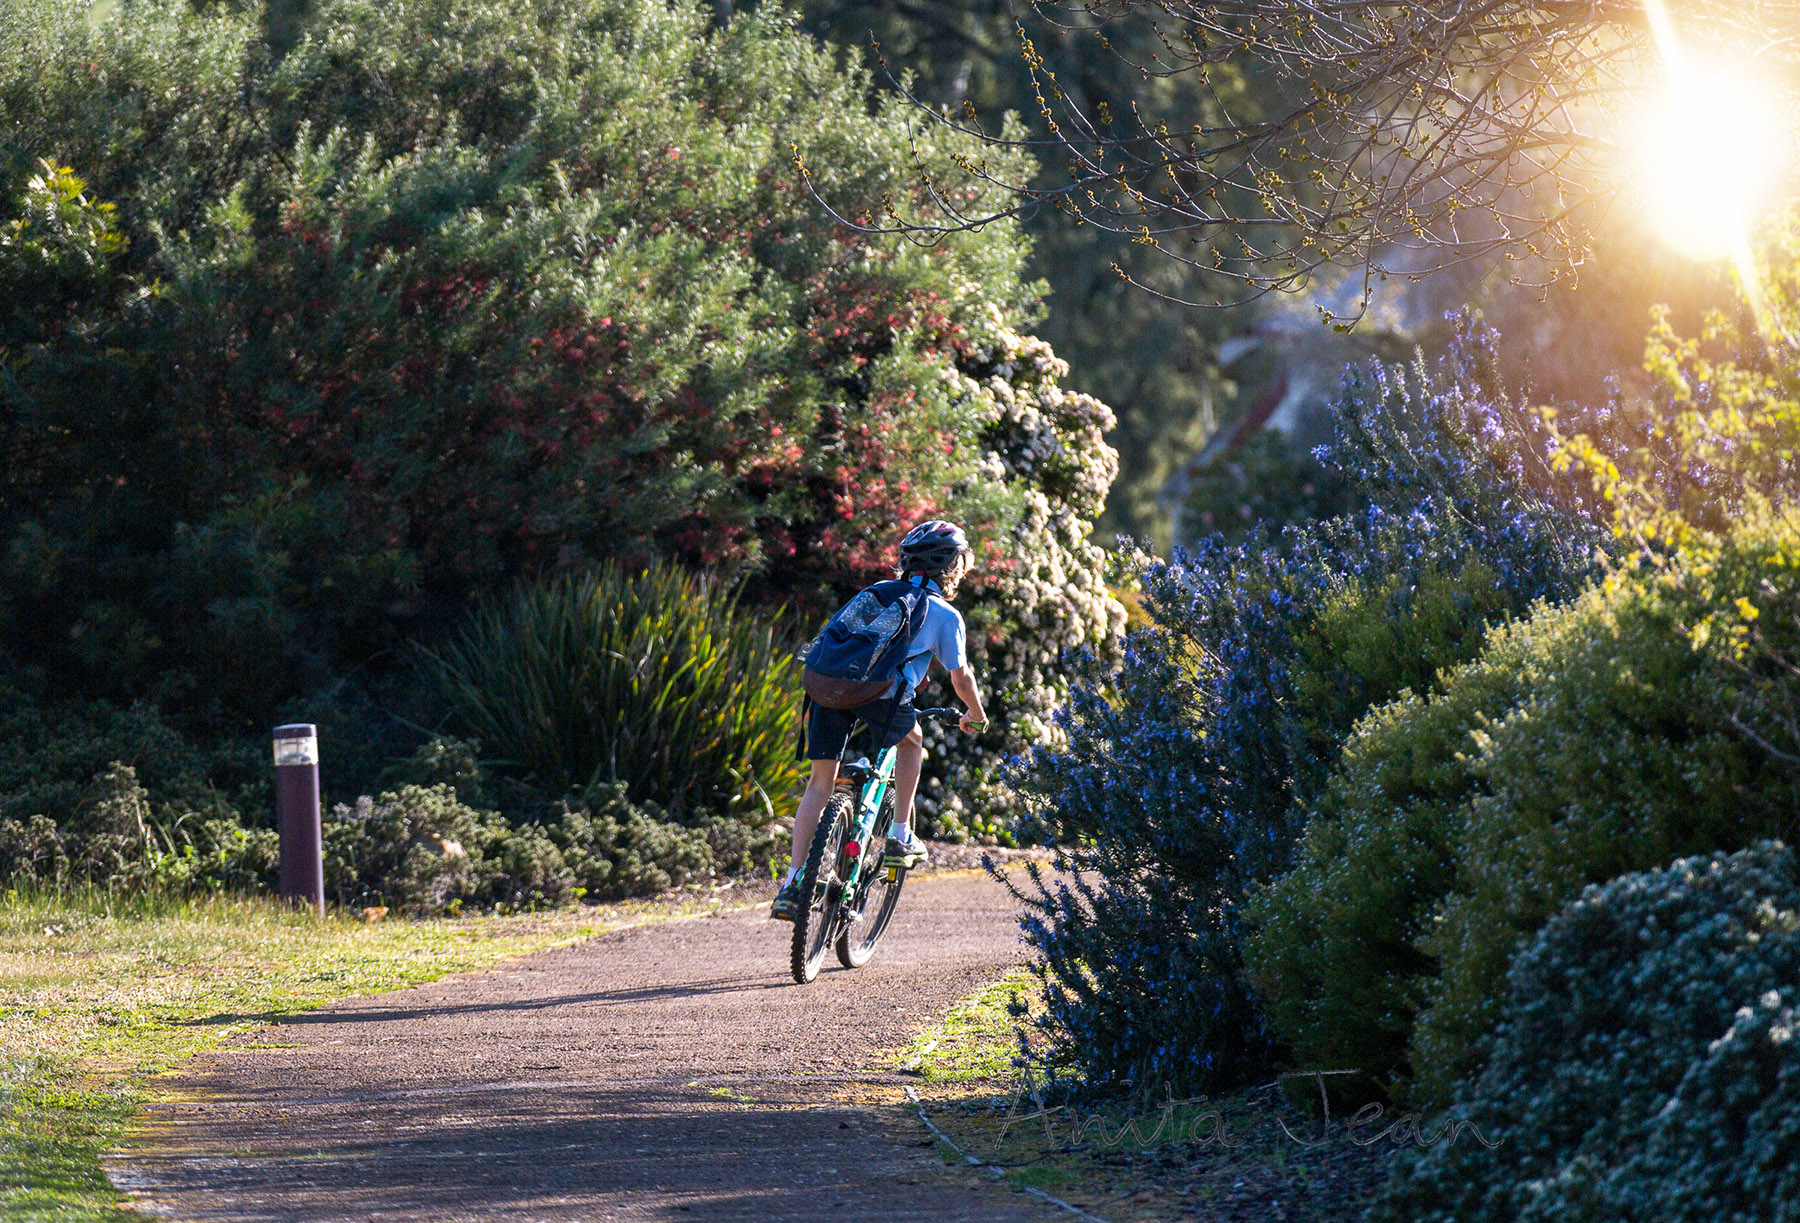 Photo of Schoolboy riding his bike to school through a park in the small town of Darkan, Western Australia. He has a helmet on his head and his backpack on his back.